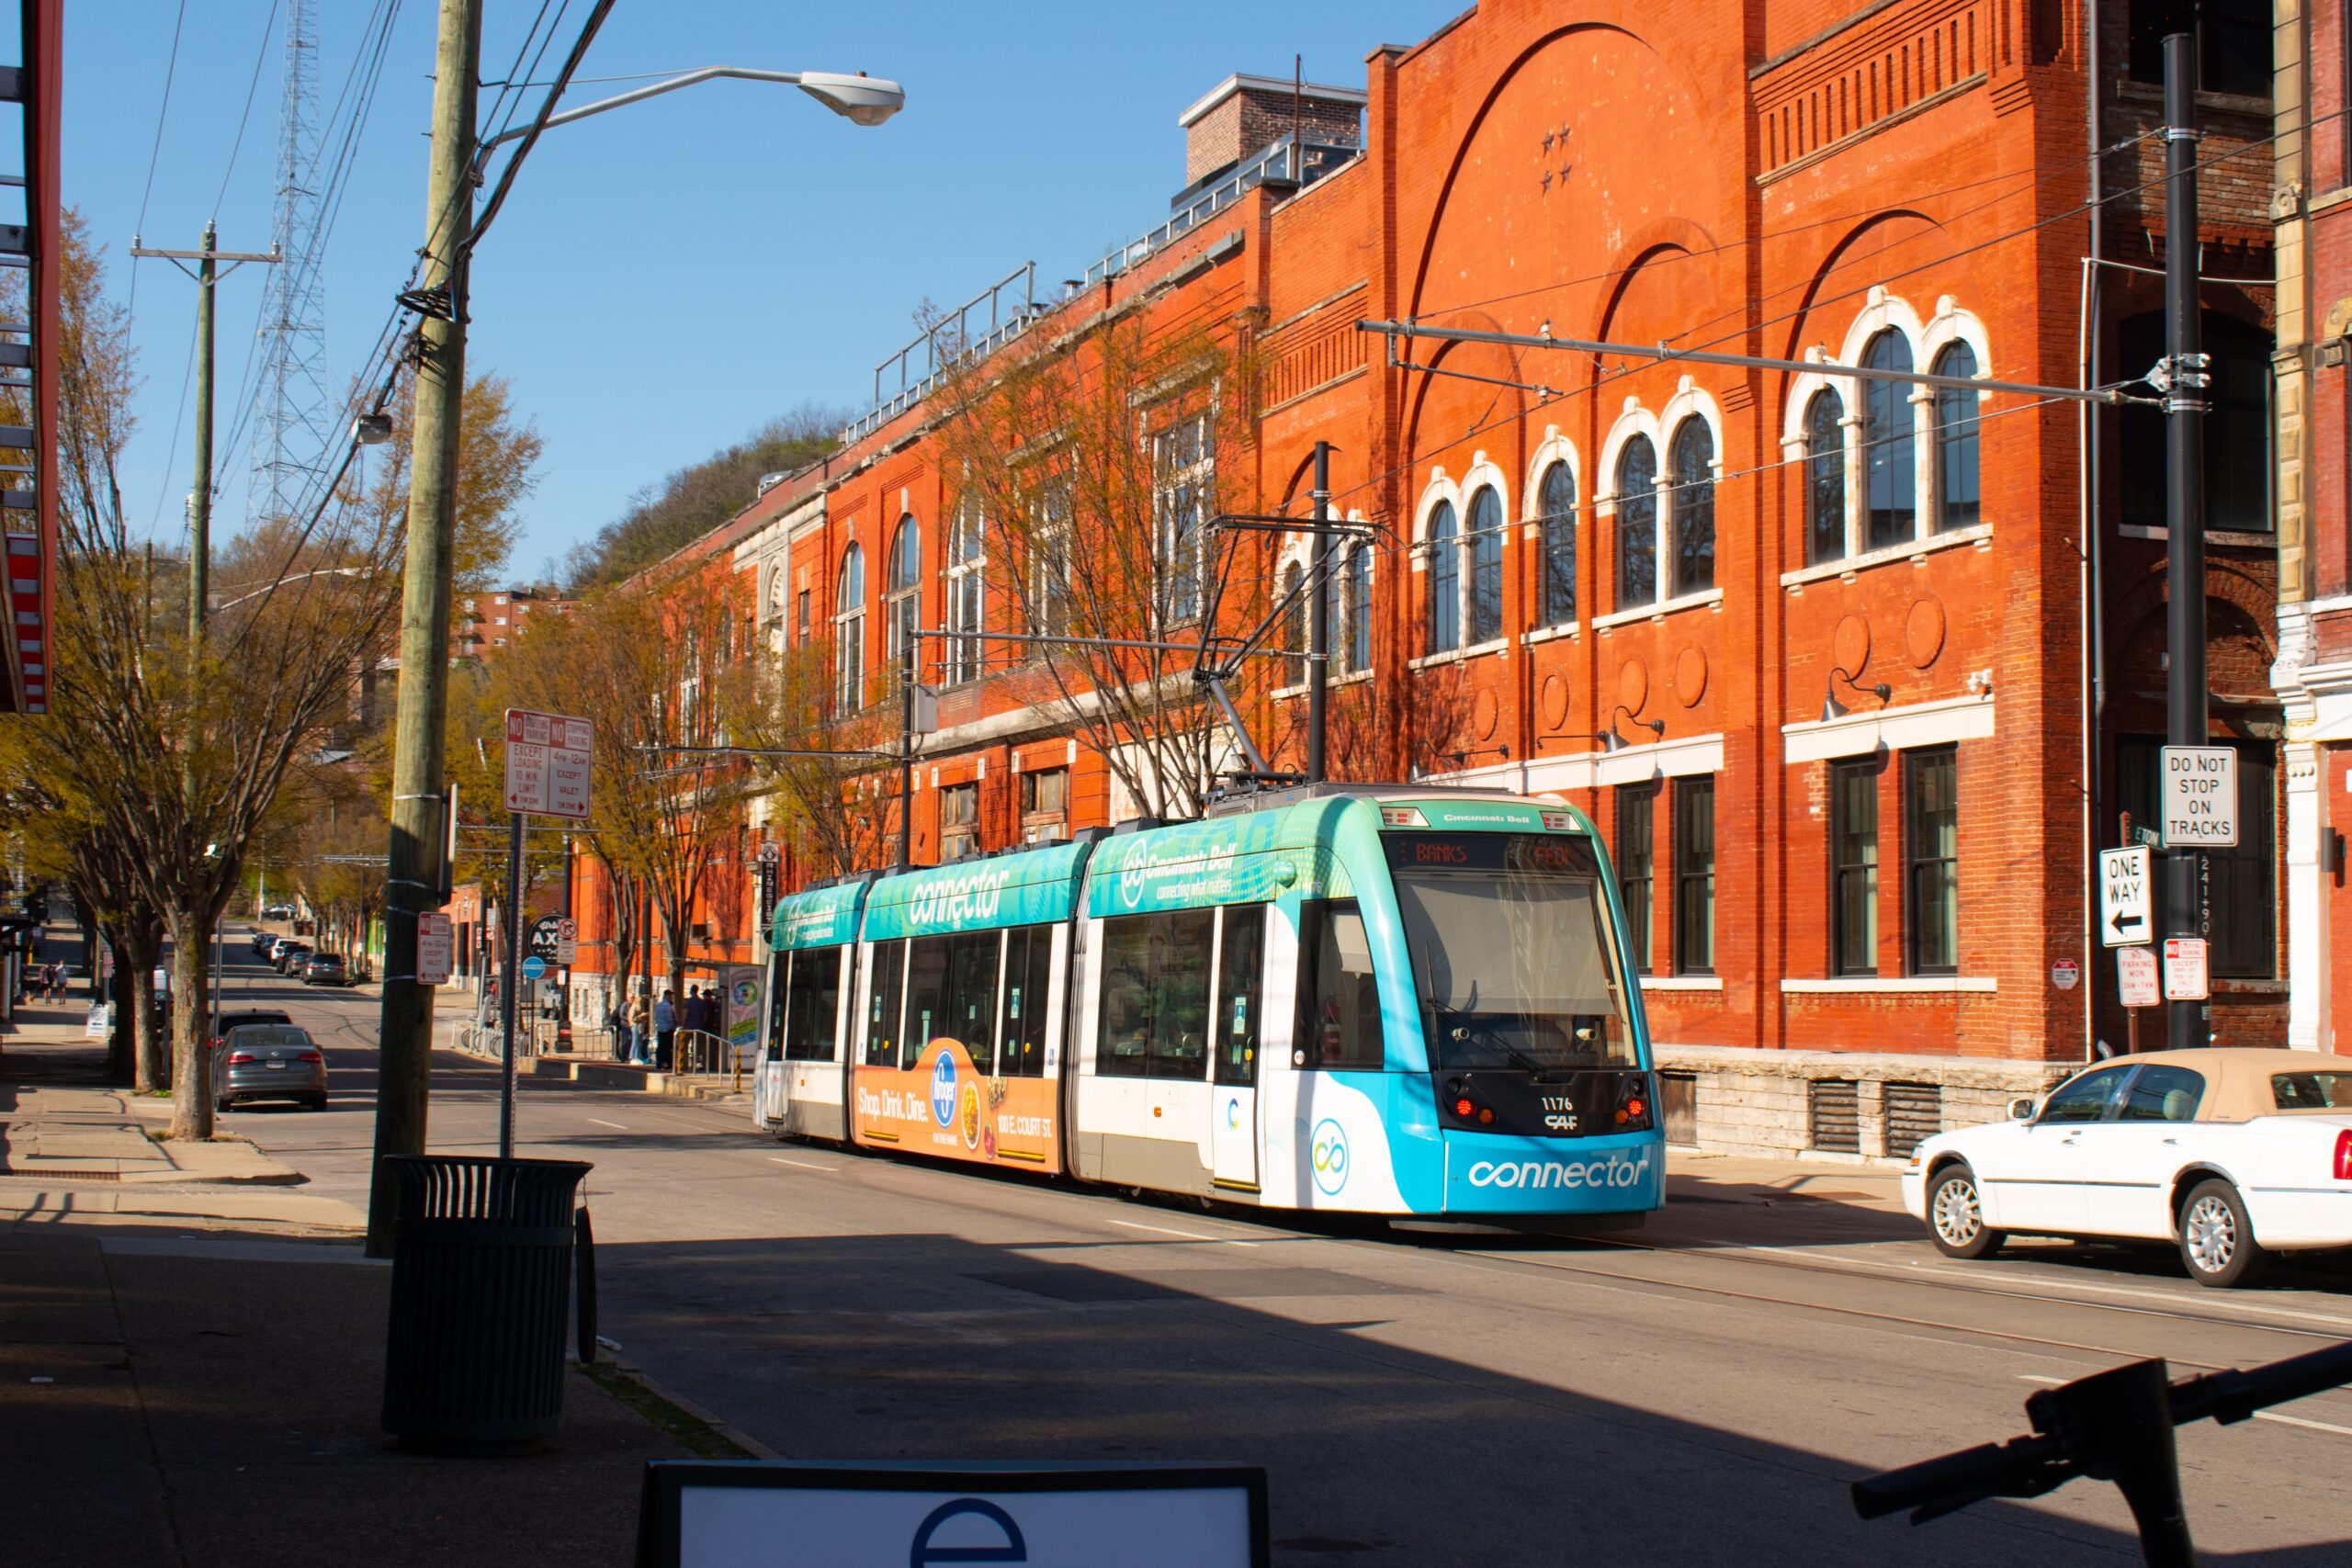 The transportation of Cincinnati is somewhat easy to navigate. Check out the best and safest ways to get around. 
pictured: A Cincinnati street with cars and public buses along the streets during fall